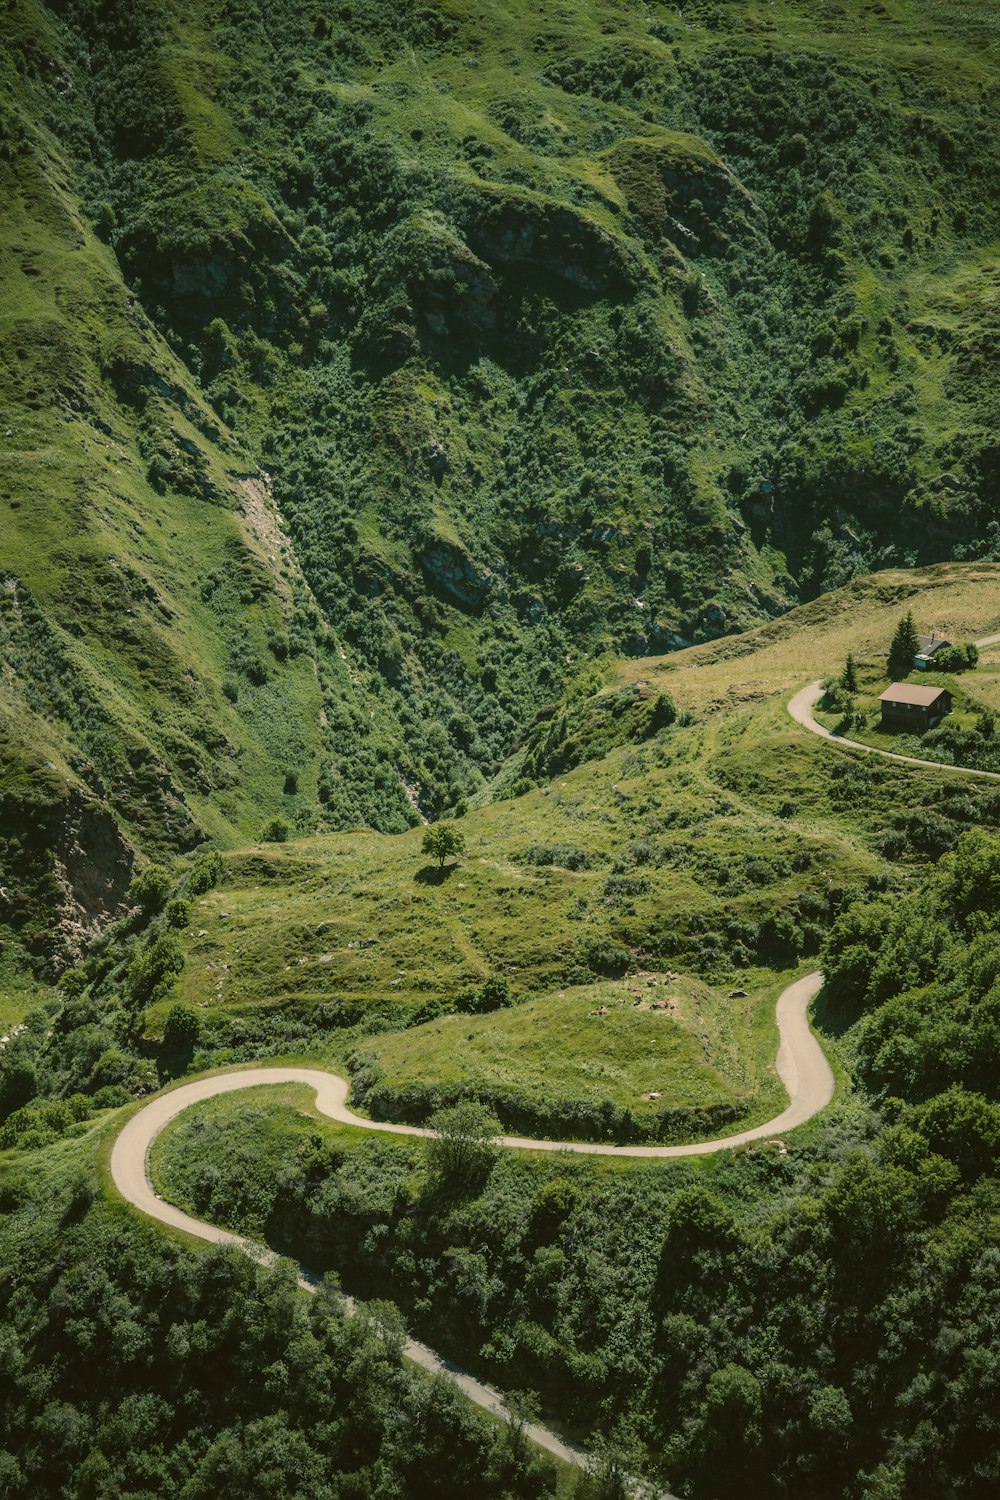 a winding road in the middle of a lush green valley